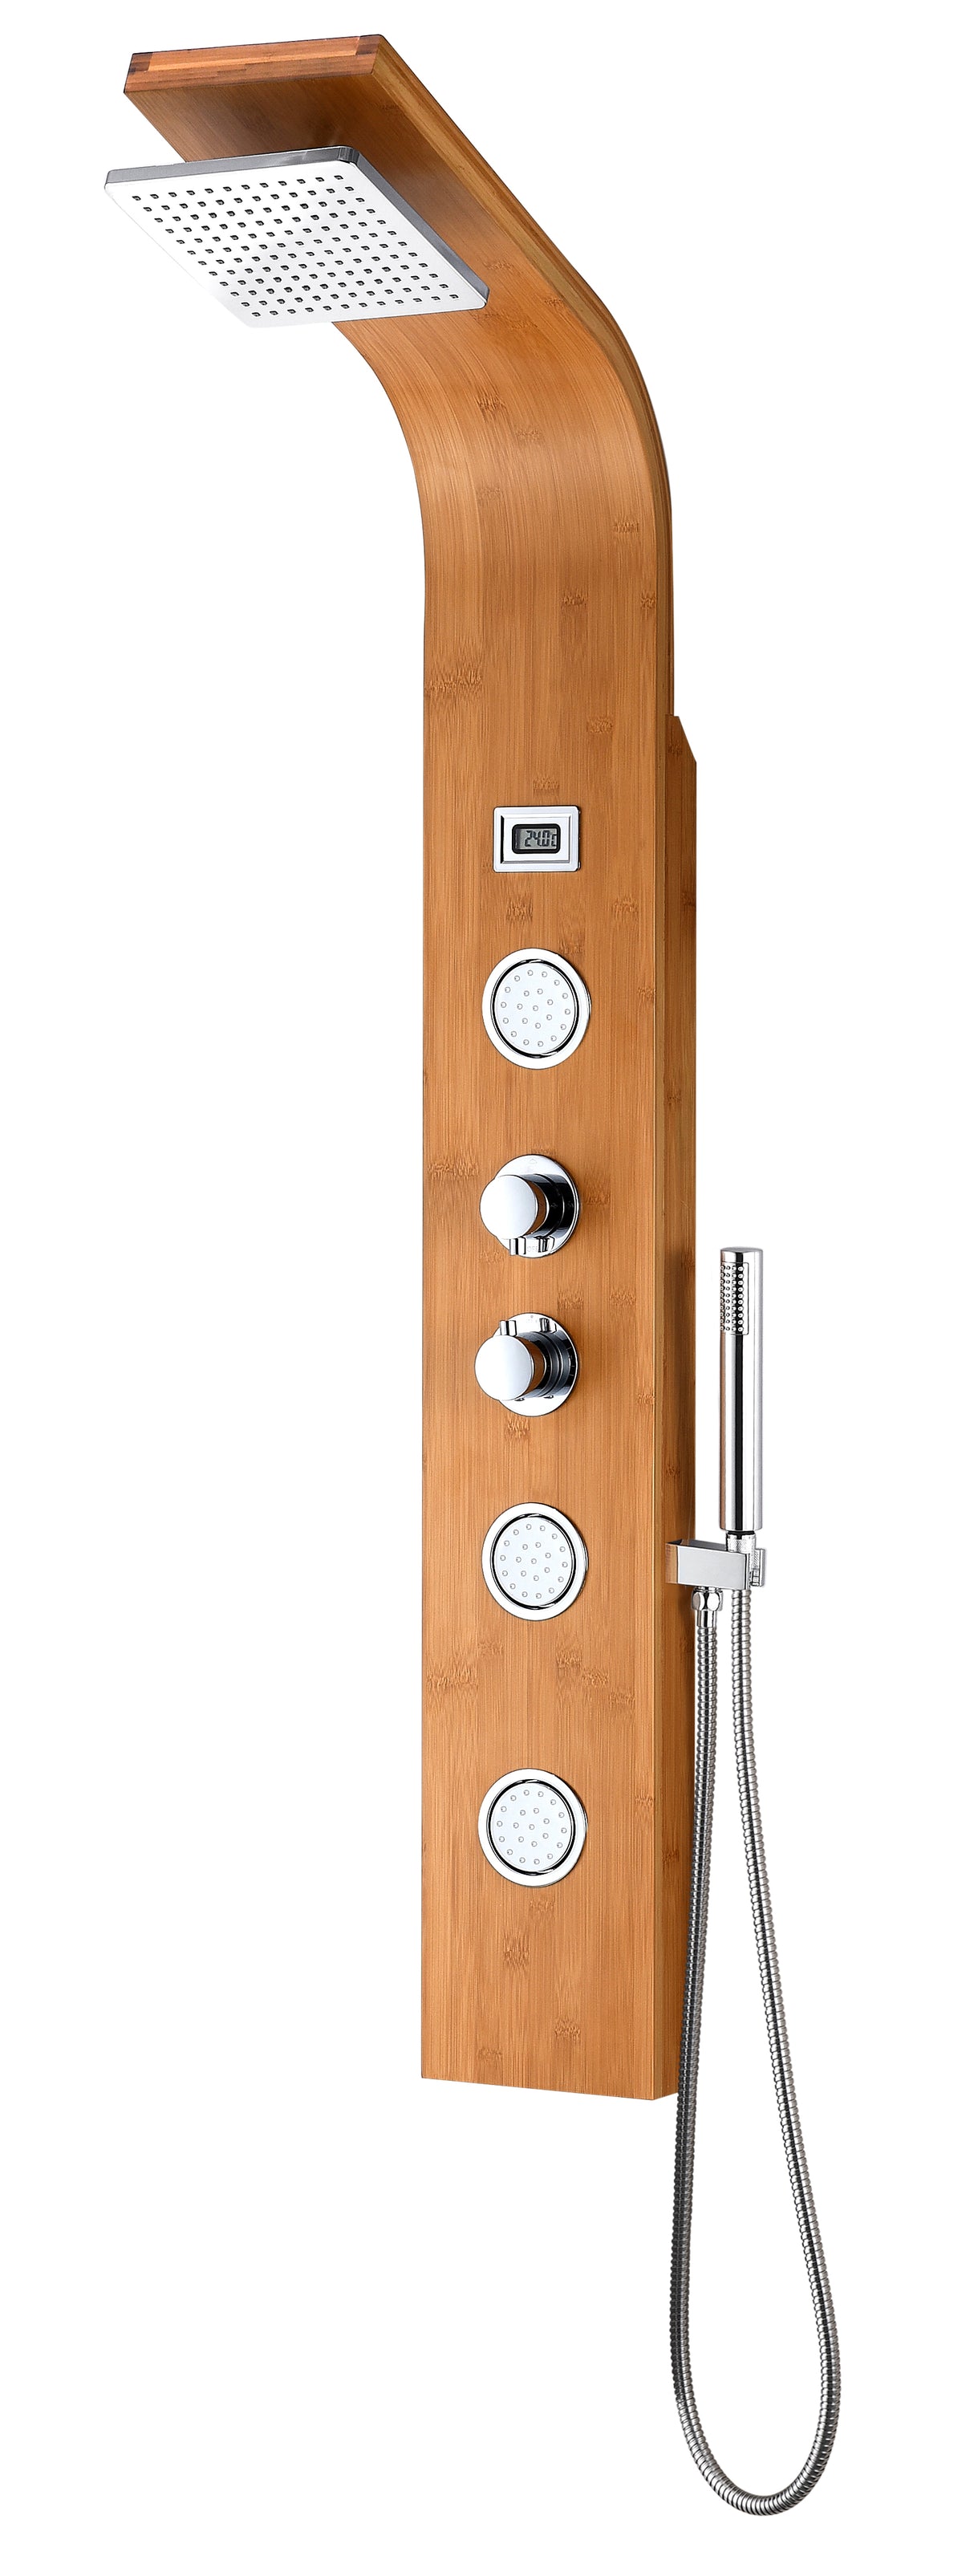 ANZZI SP-AZ059 Crane 60 in. Full Body Shower Panel with Heavy Rain Shower and Spray Wand in Natural Bamboo